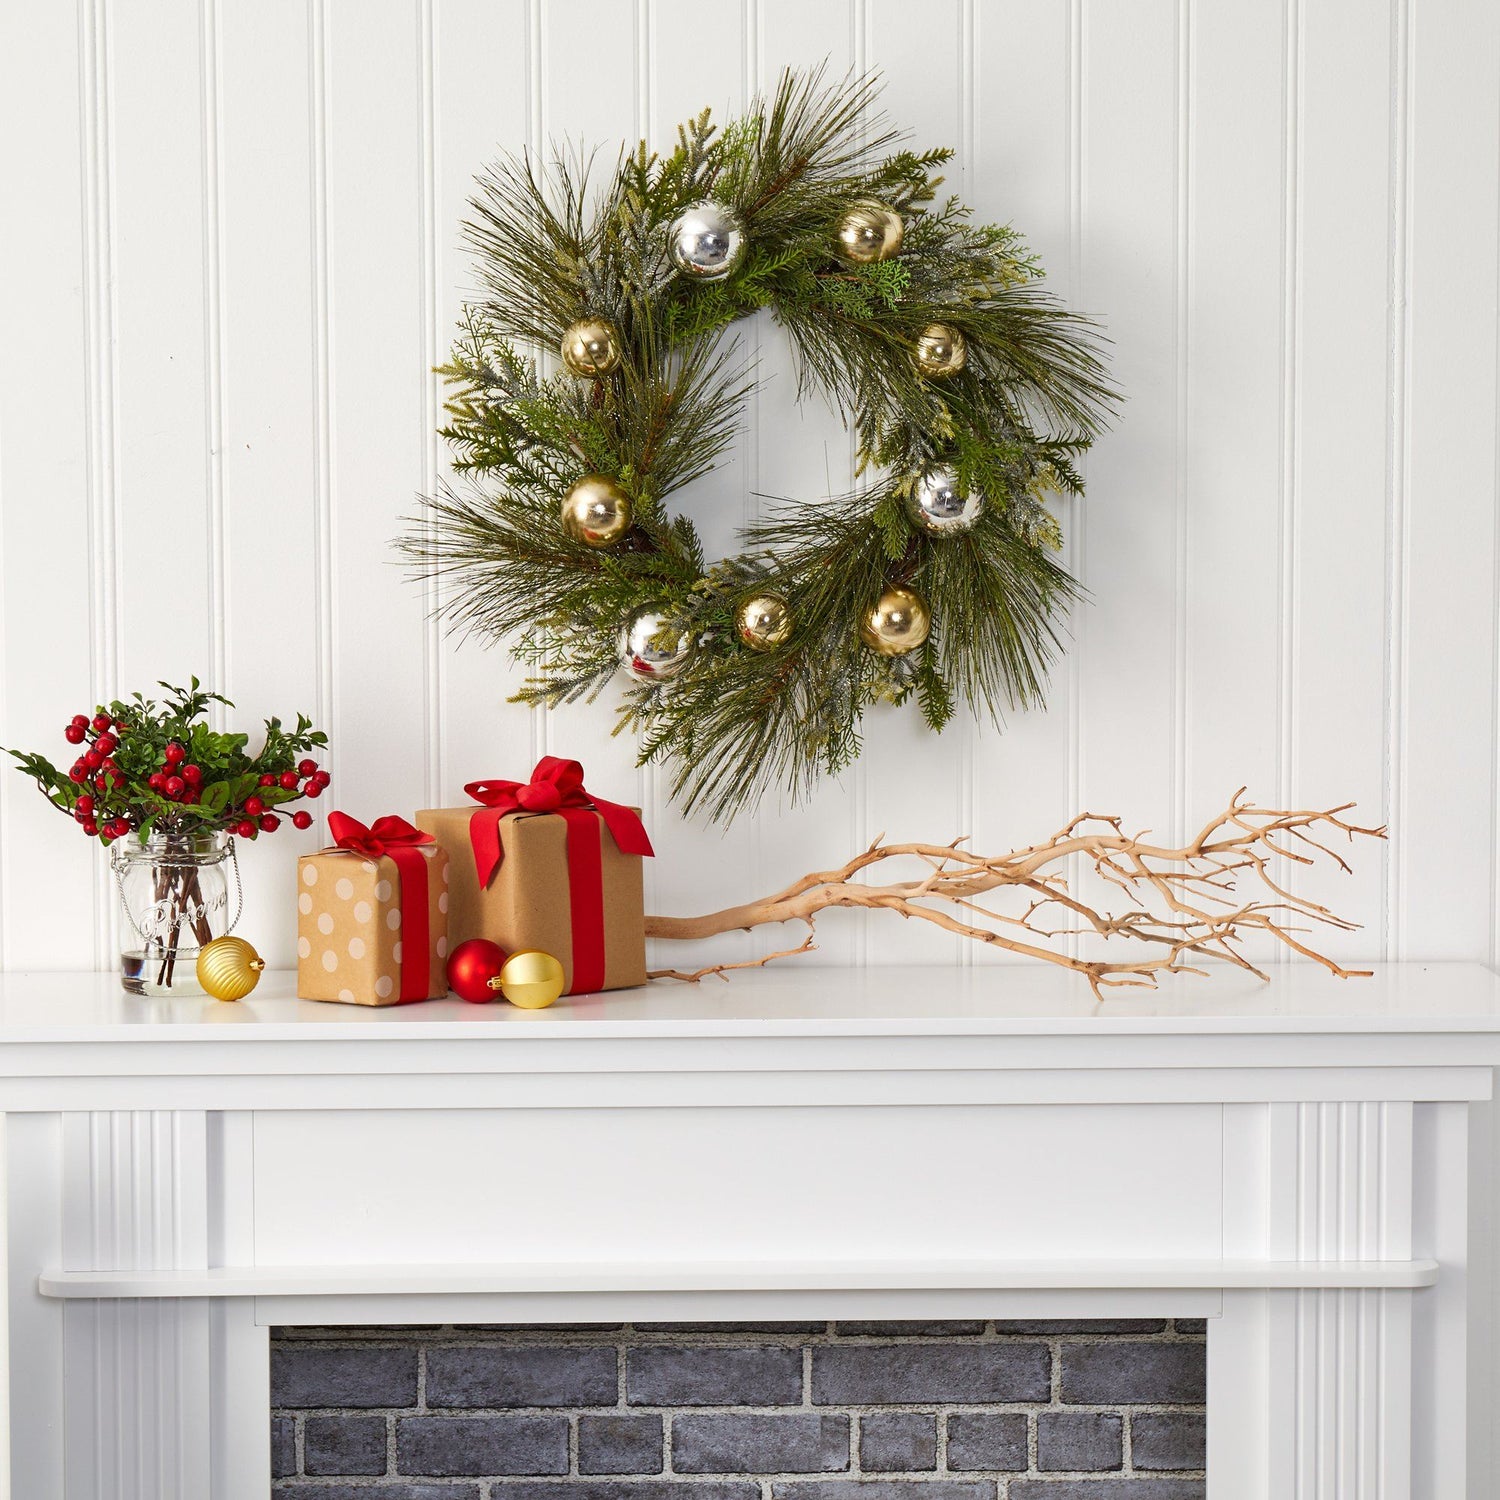 26” Sparkling Pine Artificial Wreath with Decorative Ornaments